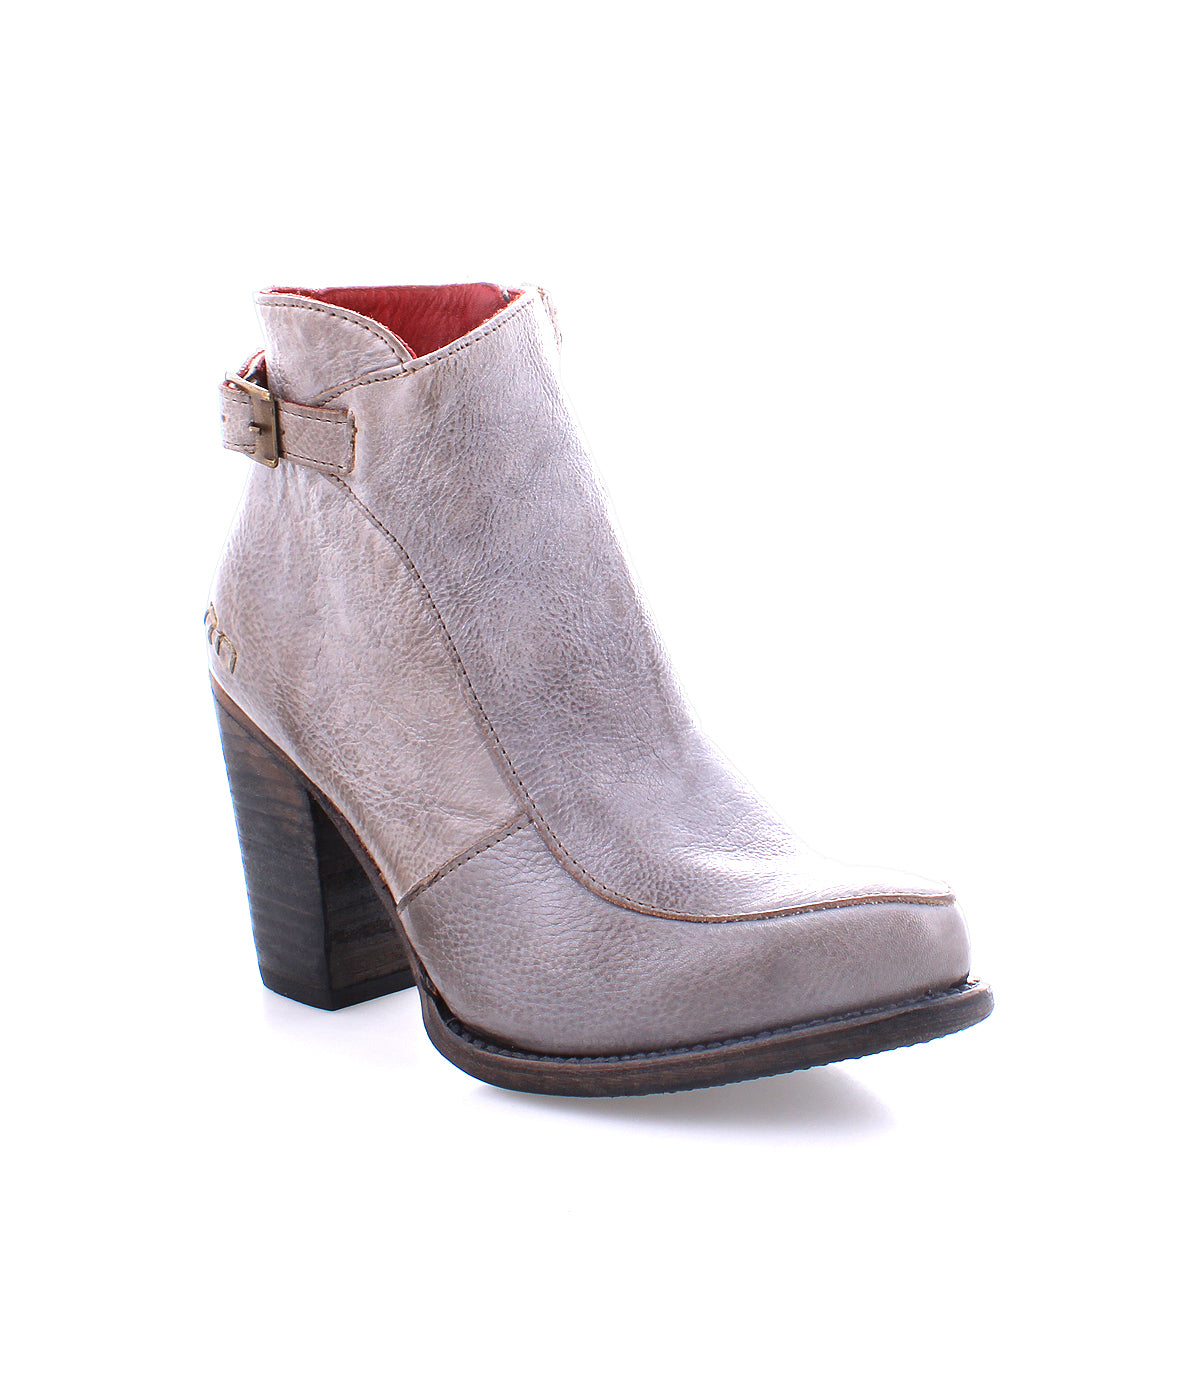 A single Isla gray leather heeled bootie from Bed Stu with a vintage buckle accent and a chunky heel, isolated on a white background.